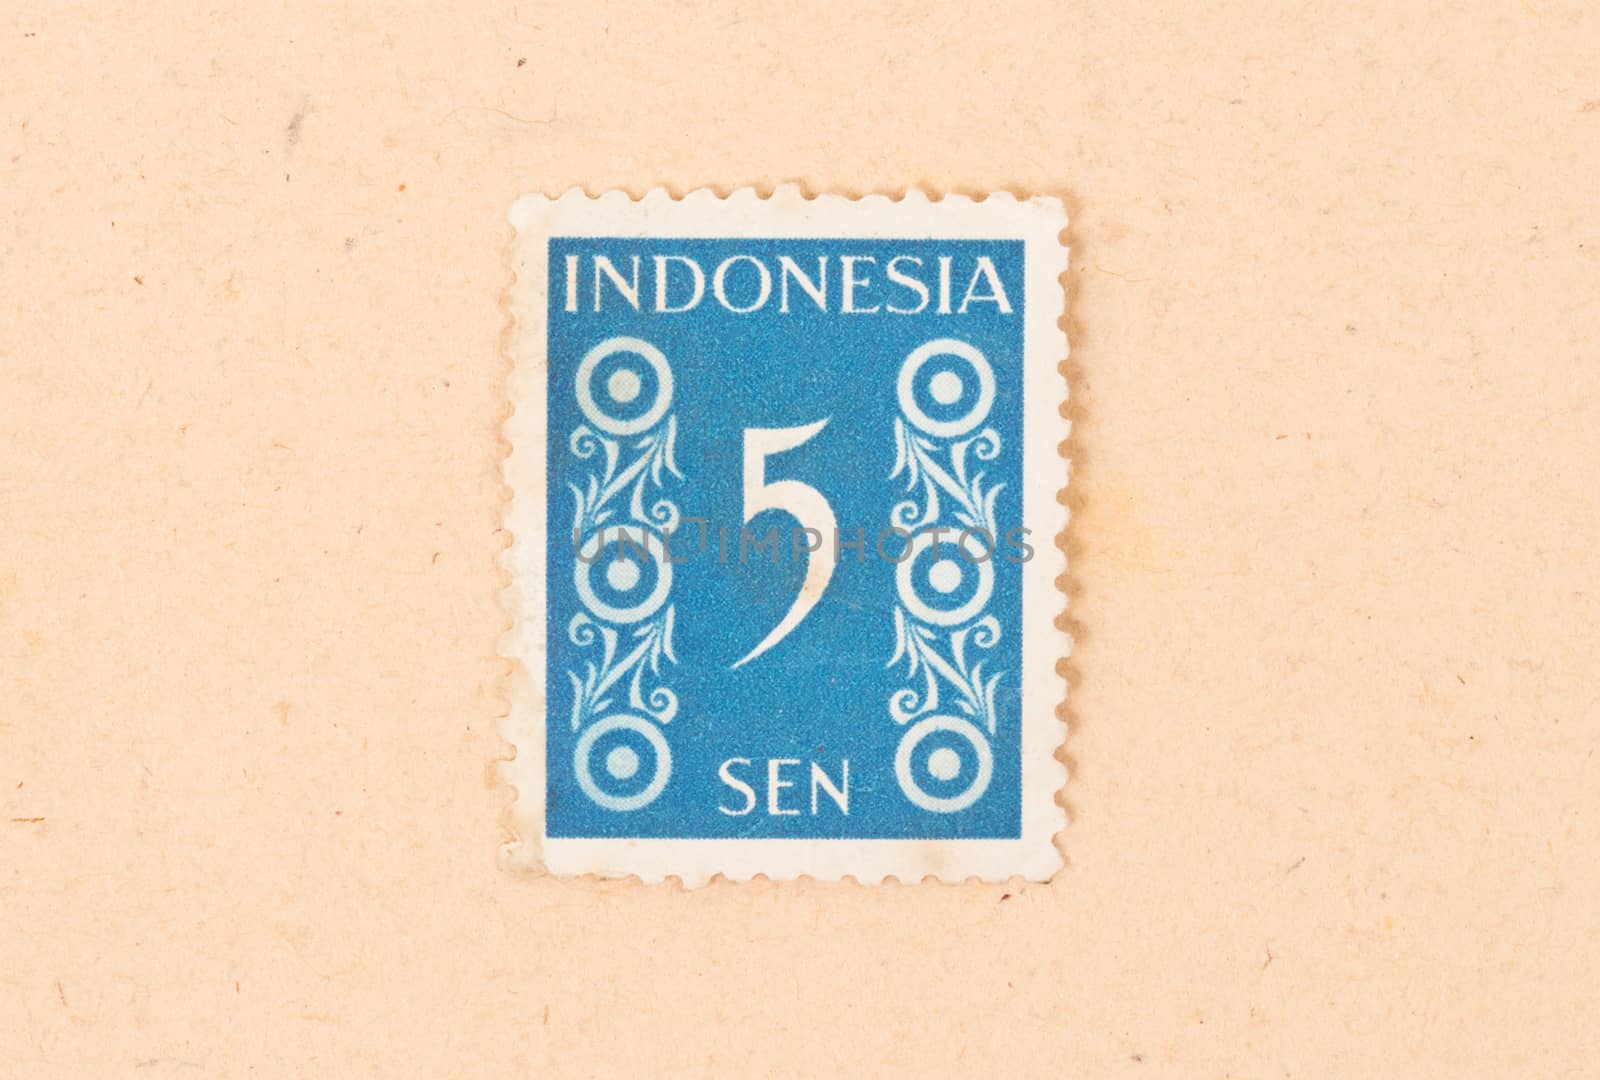 INDONESIA - CIRCA 1960: A stamp printed in Indonesia shows it's value, circa 1960